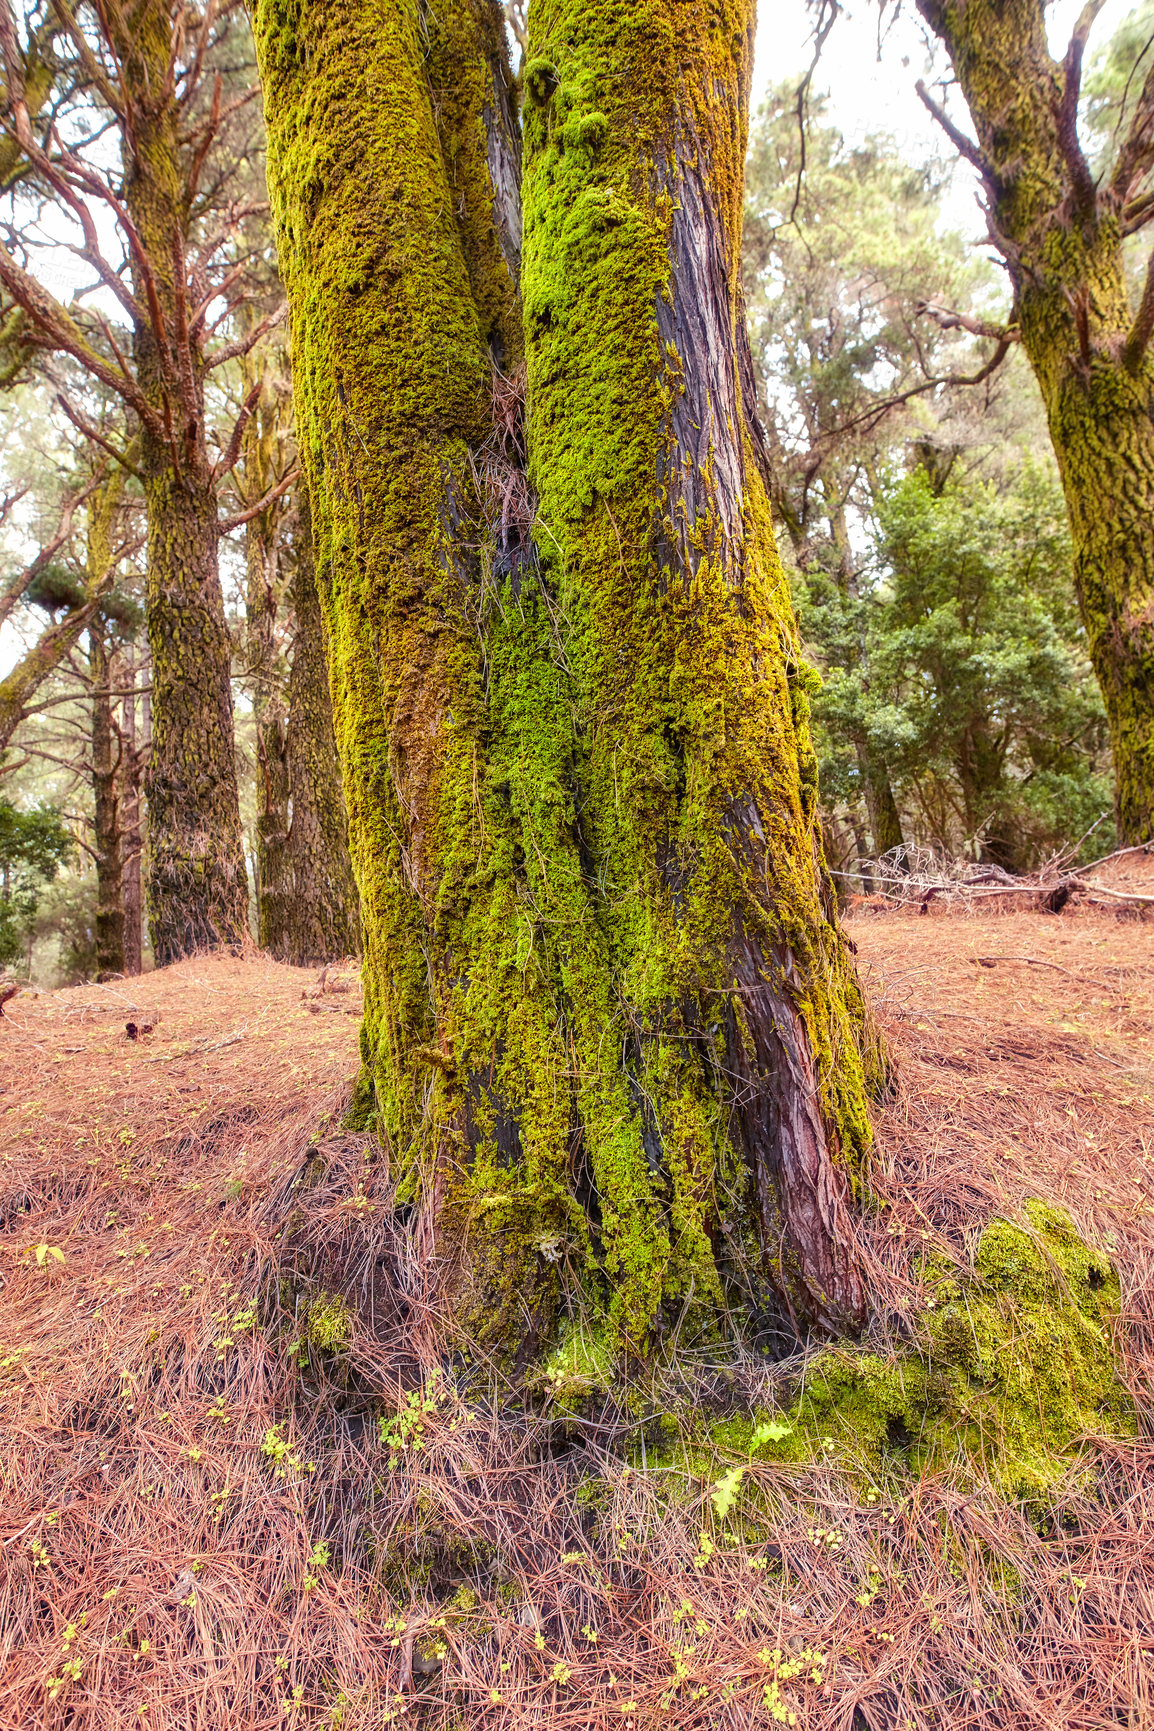 Buy stock photo Moss and algae growing on big pine trees in a forest on the mountains of La Palma, Canary Islands, Spain. Scenic natural landscape with wooden texture of old bark in a remote and peaceful meadow